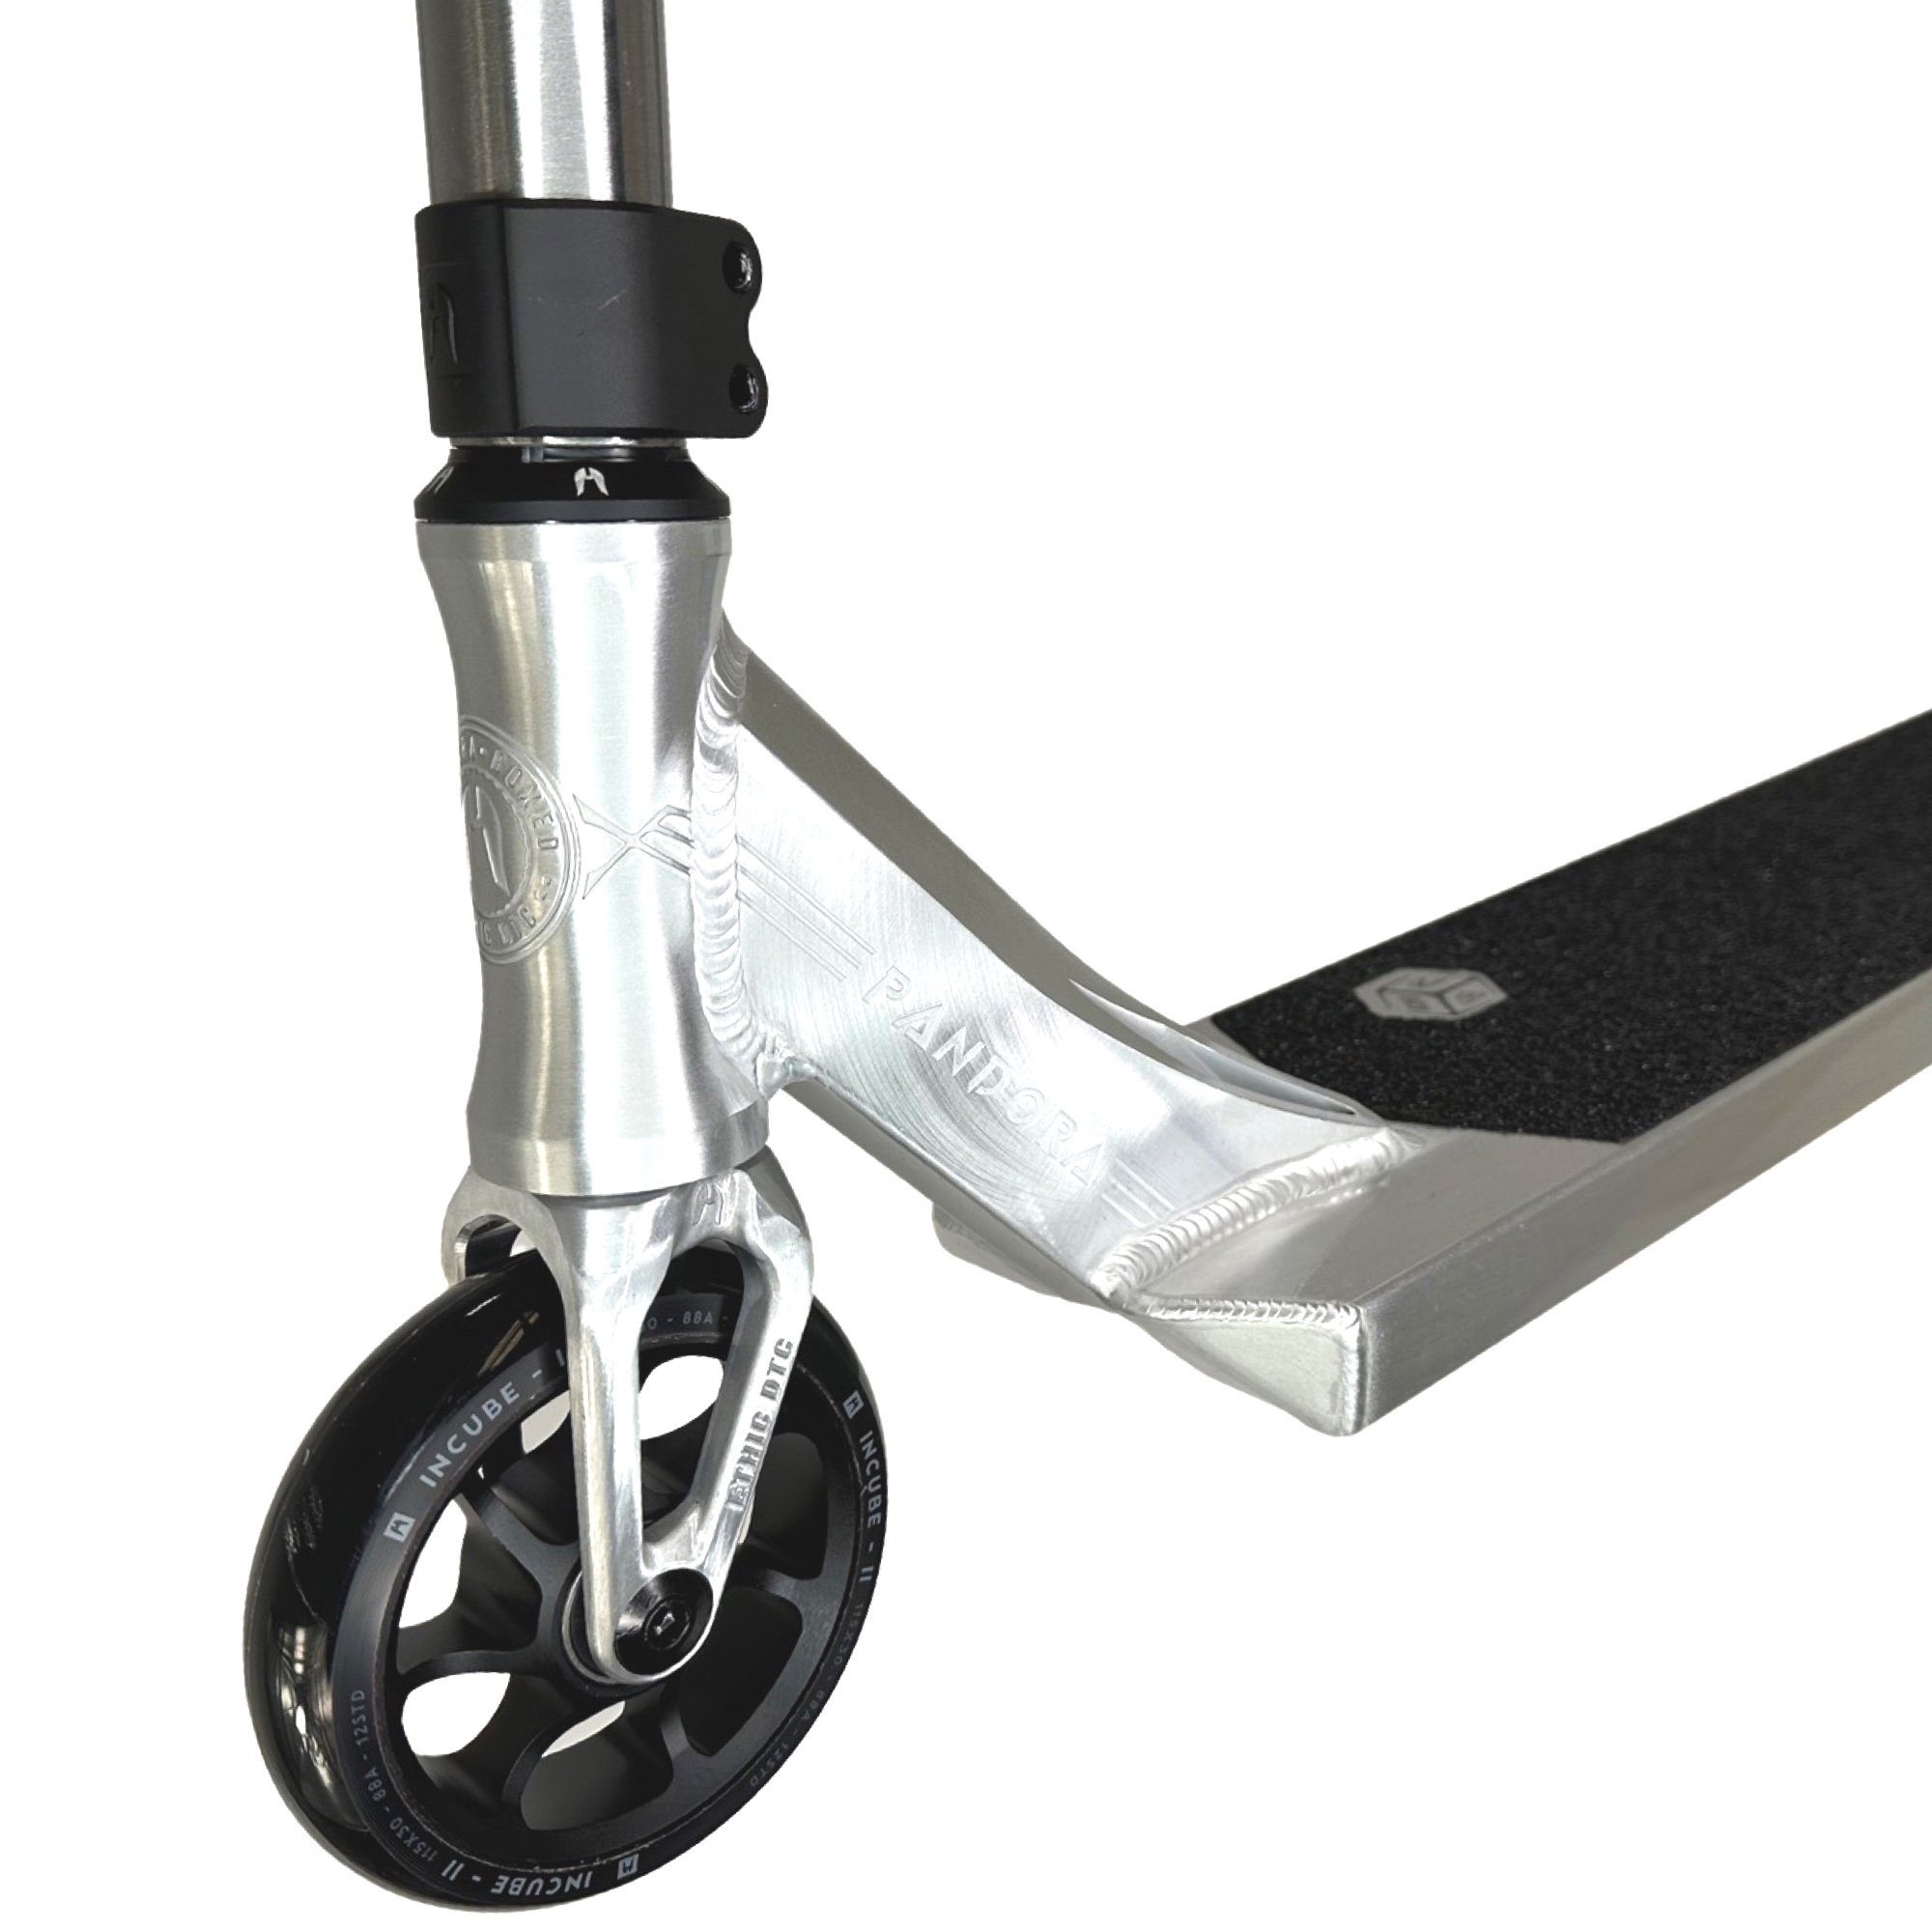 Silber L Ethic DTC 3,4kg Stunt-Scooter DTC Ethic Pandora H=90cm Stuntscooter